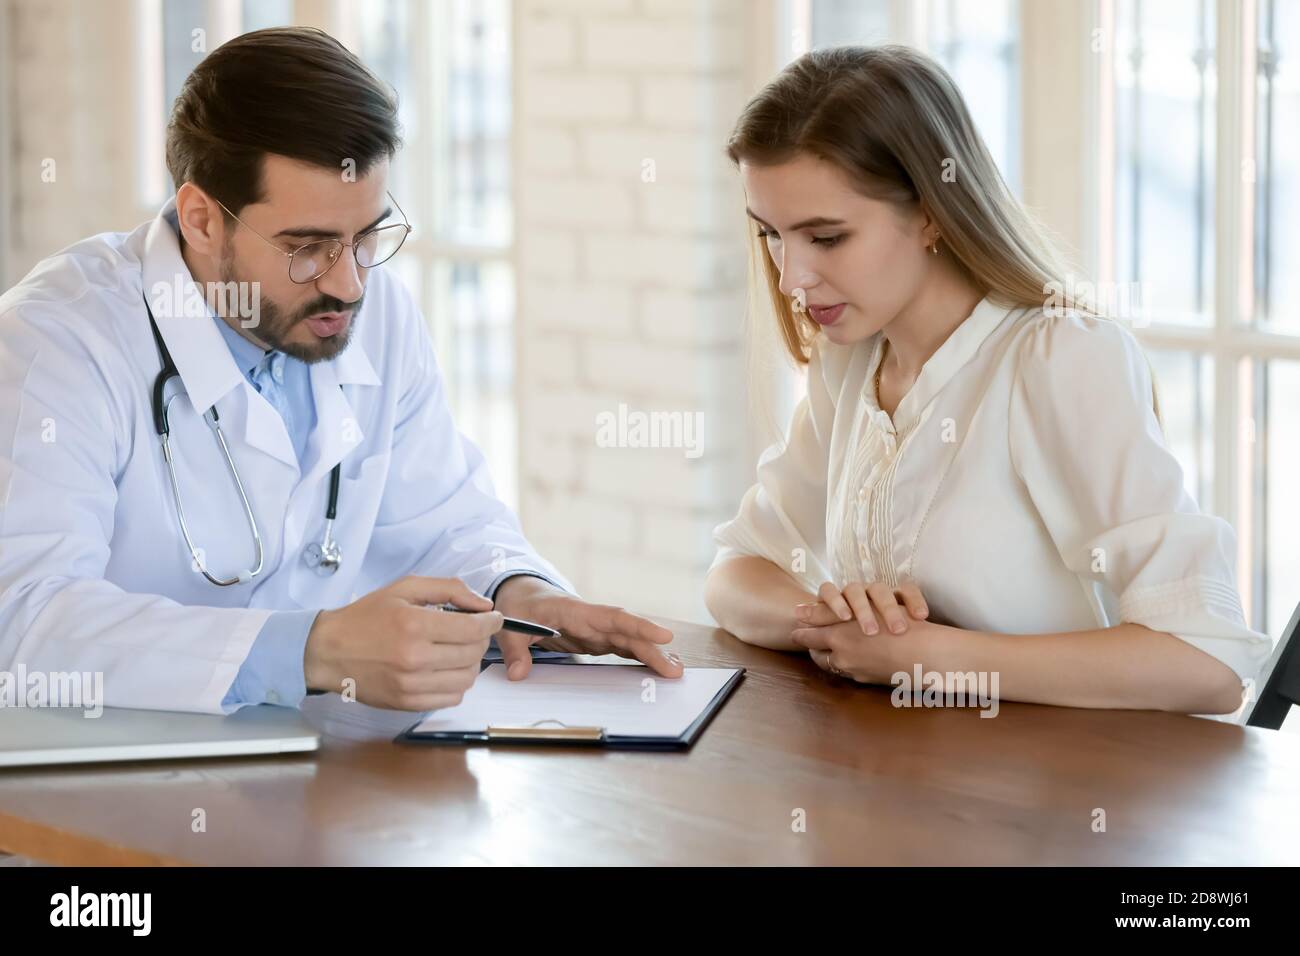 Capable qualified male doctor prescribing treatment to young female patient Stock Photo